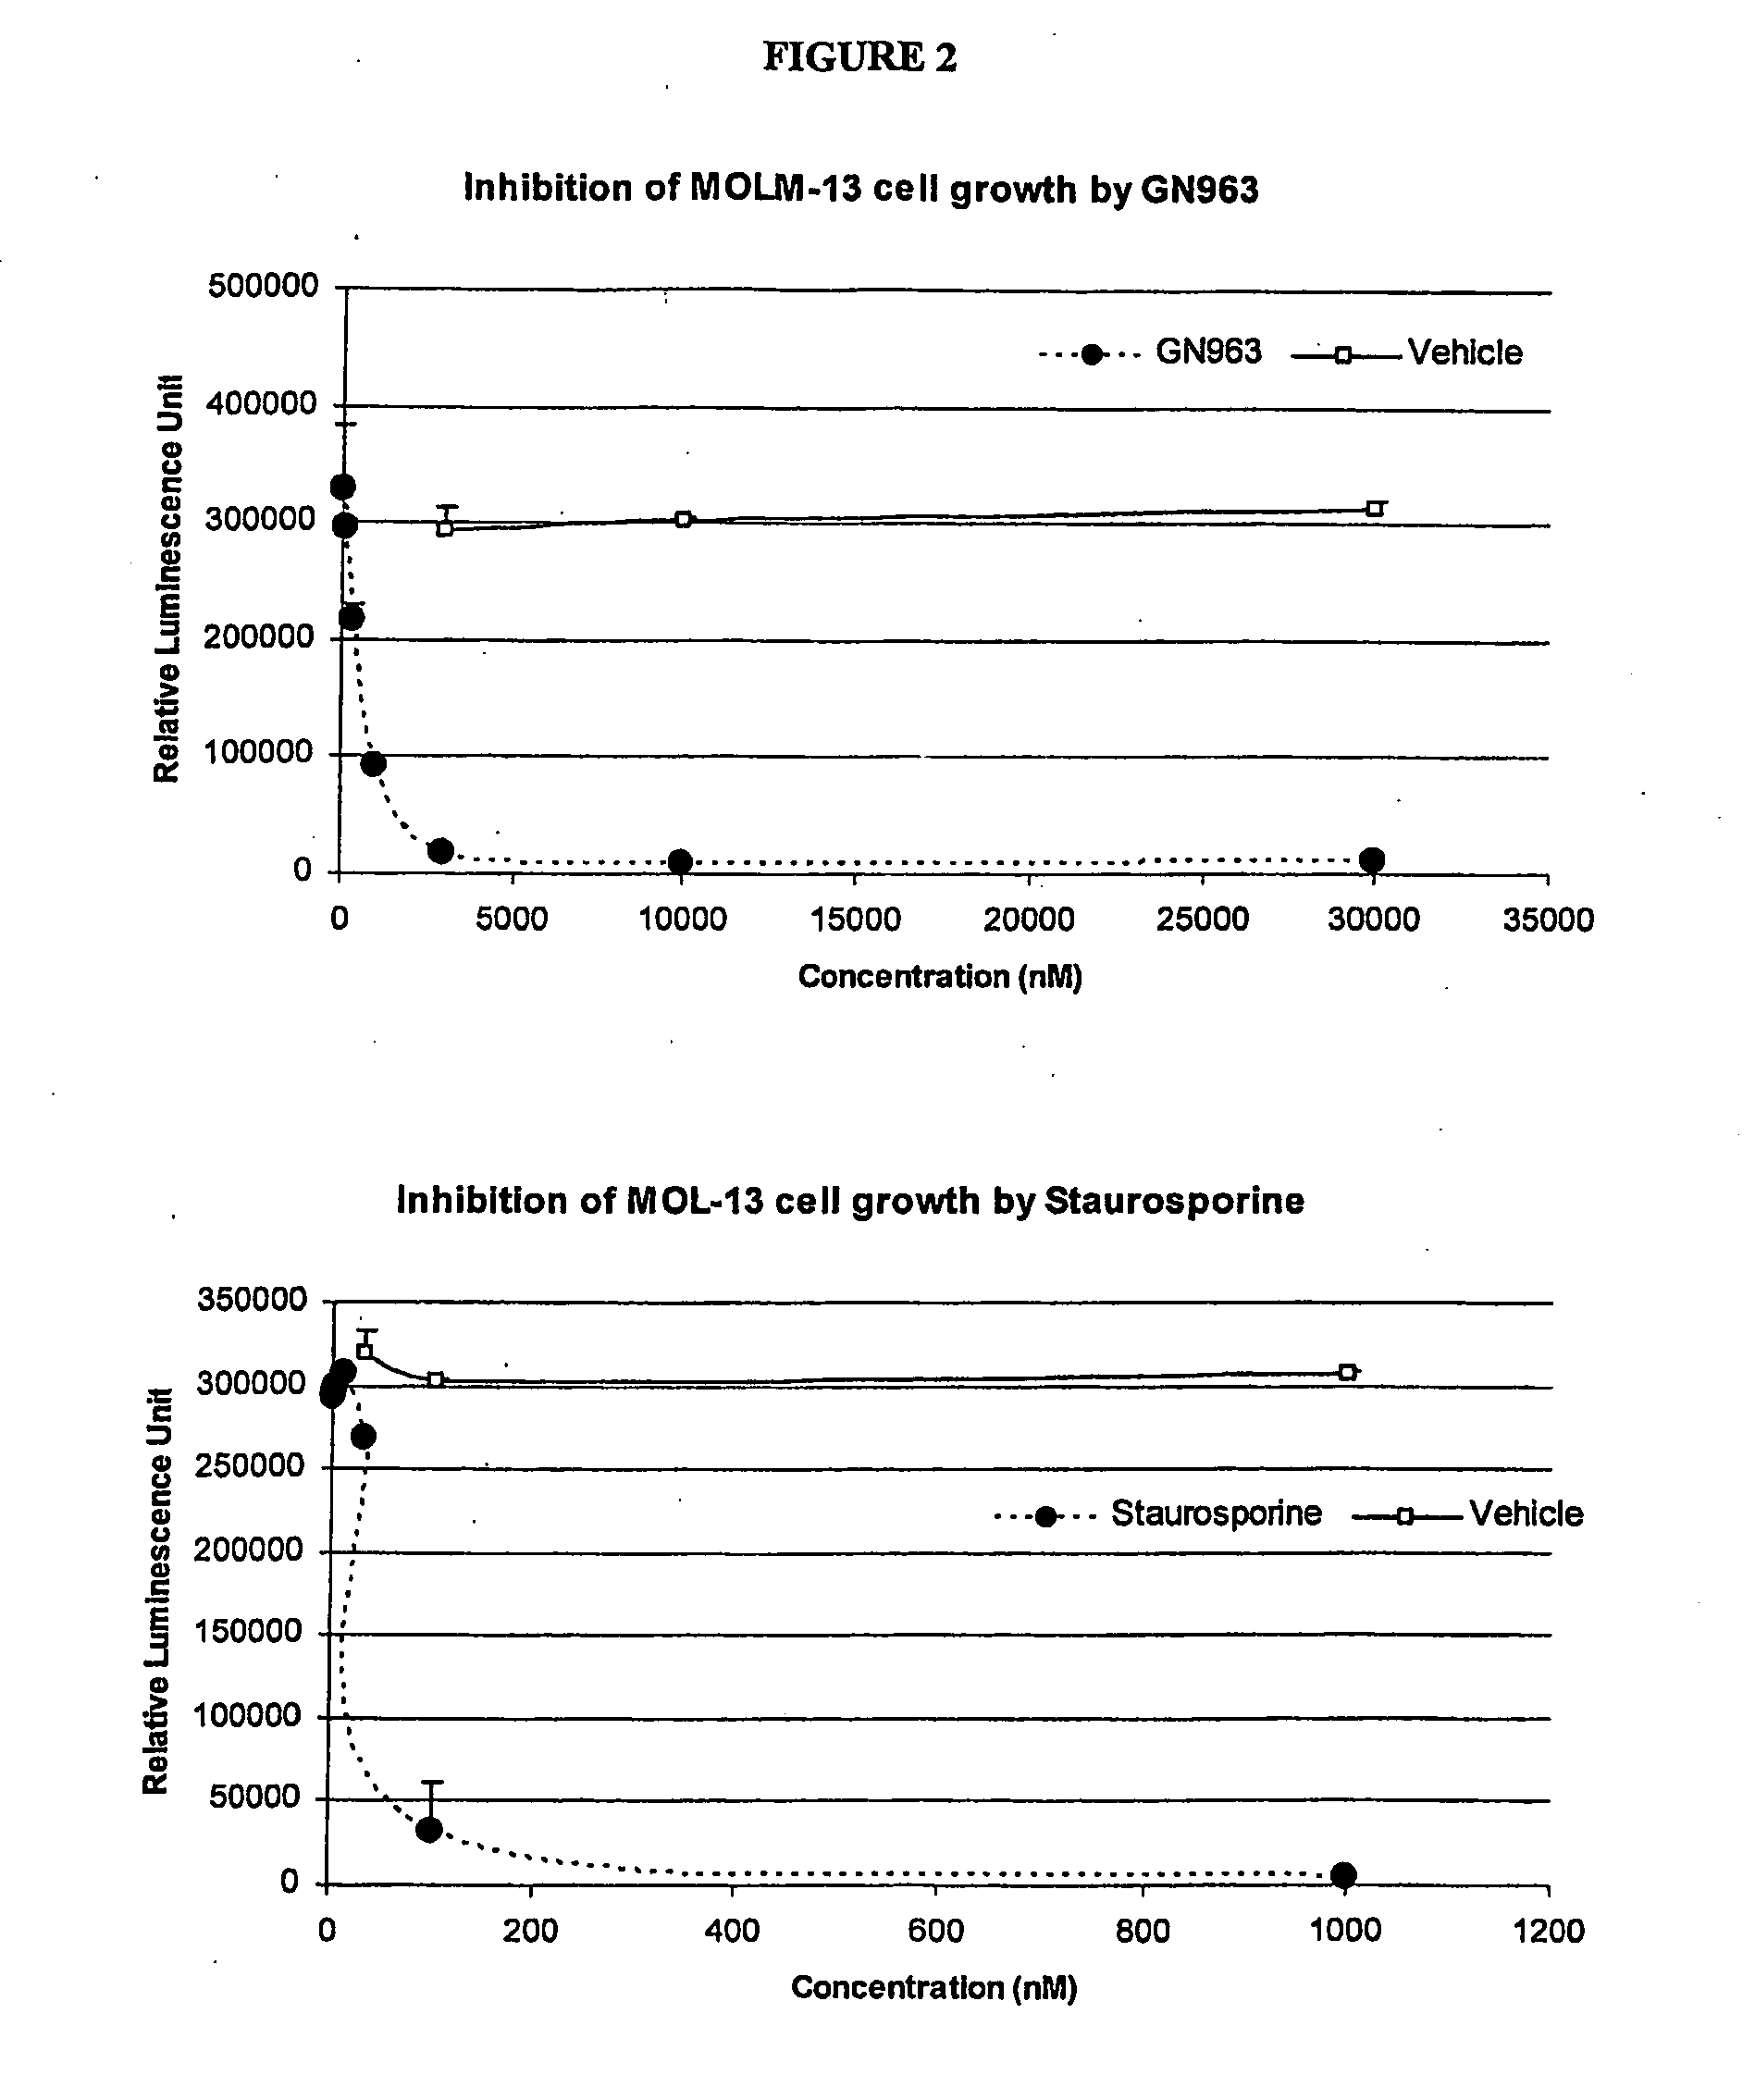 Anti-vascular and anti-proliferation methods, therapies, and combinations employing specific tyrosine kinase inhibitors